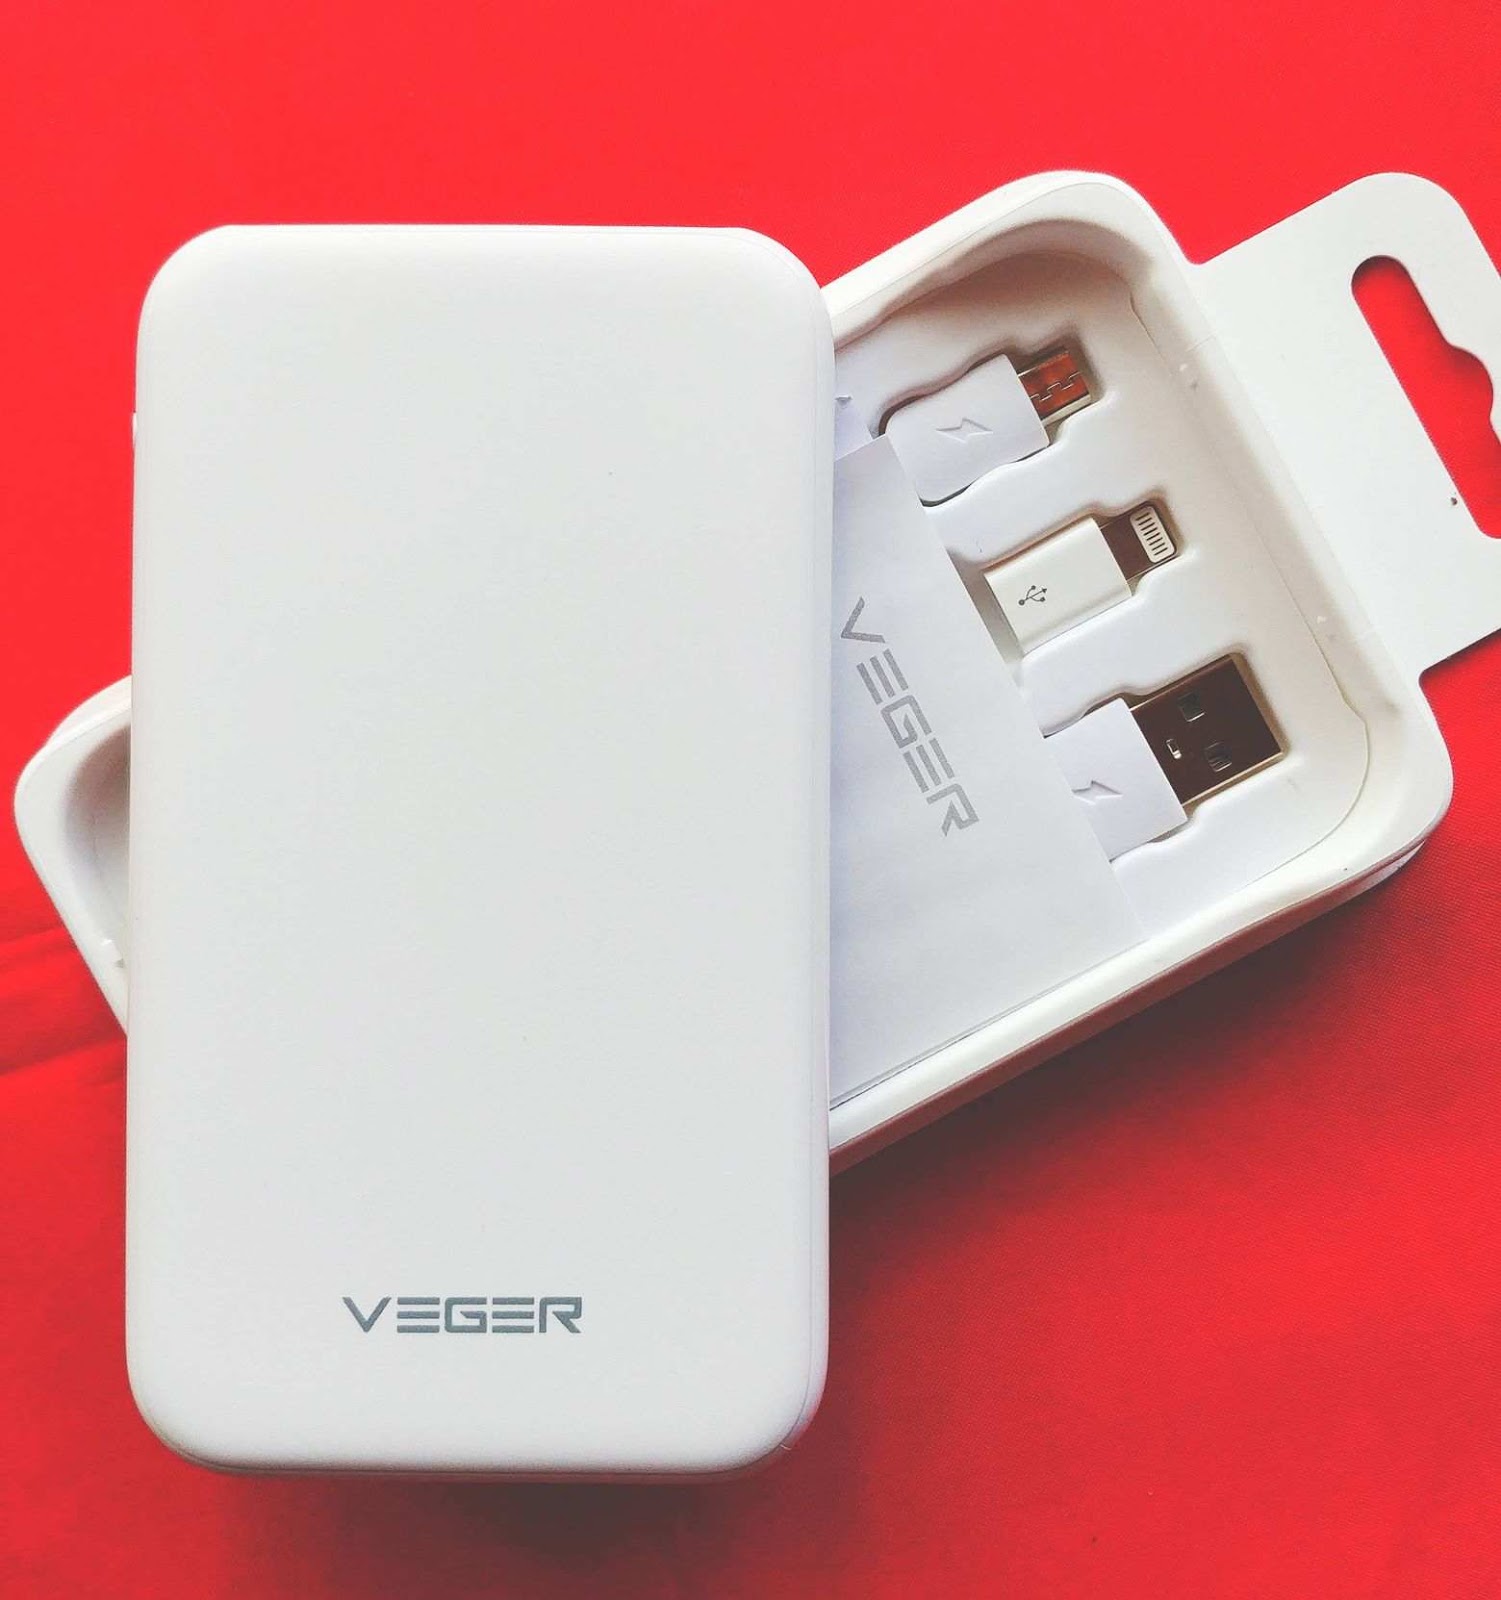 Putting the Veger VP-0506 5,000 mAh to the test